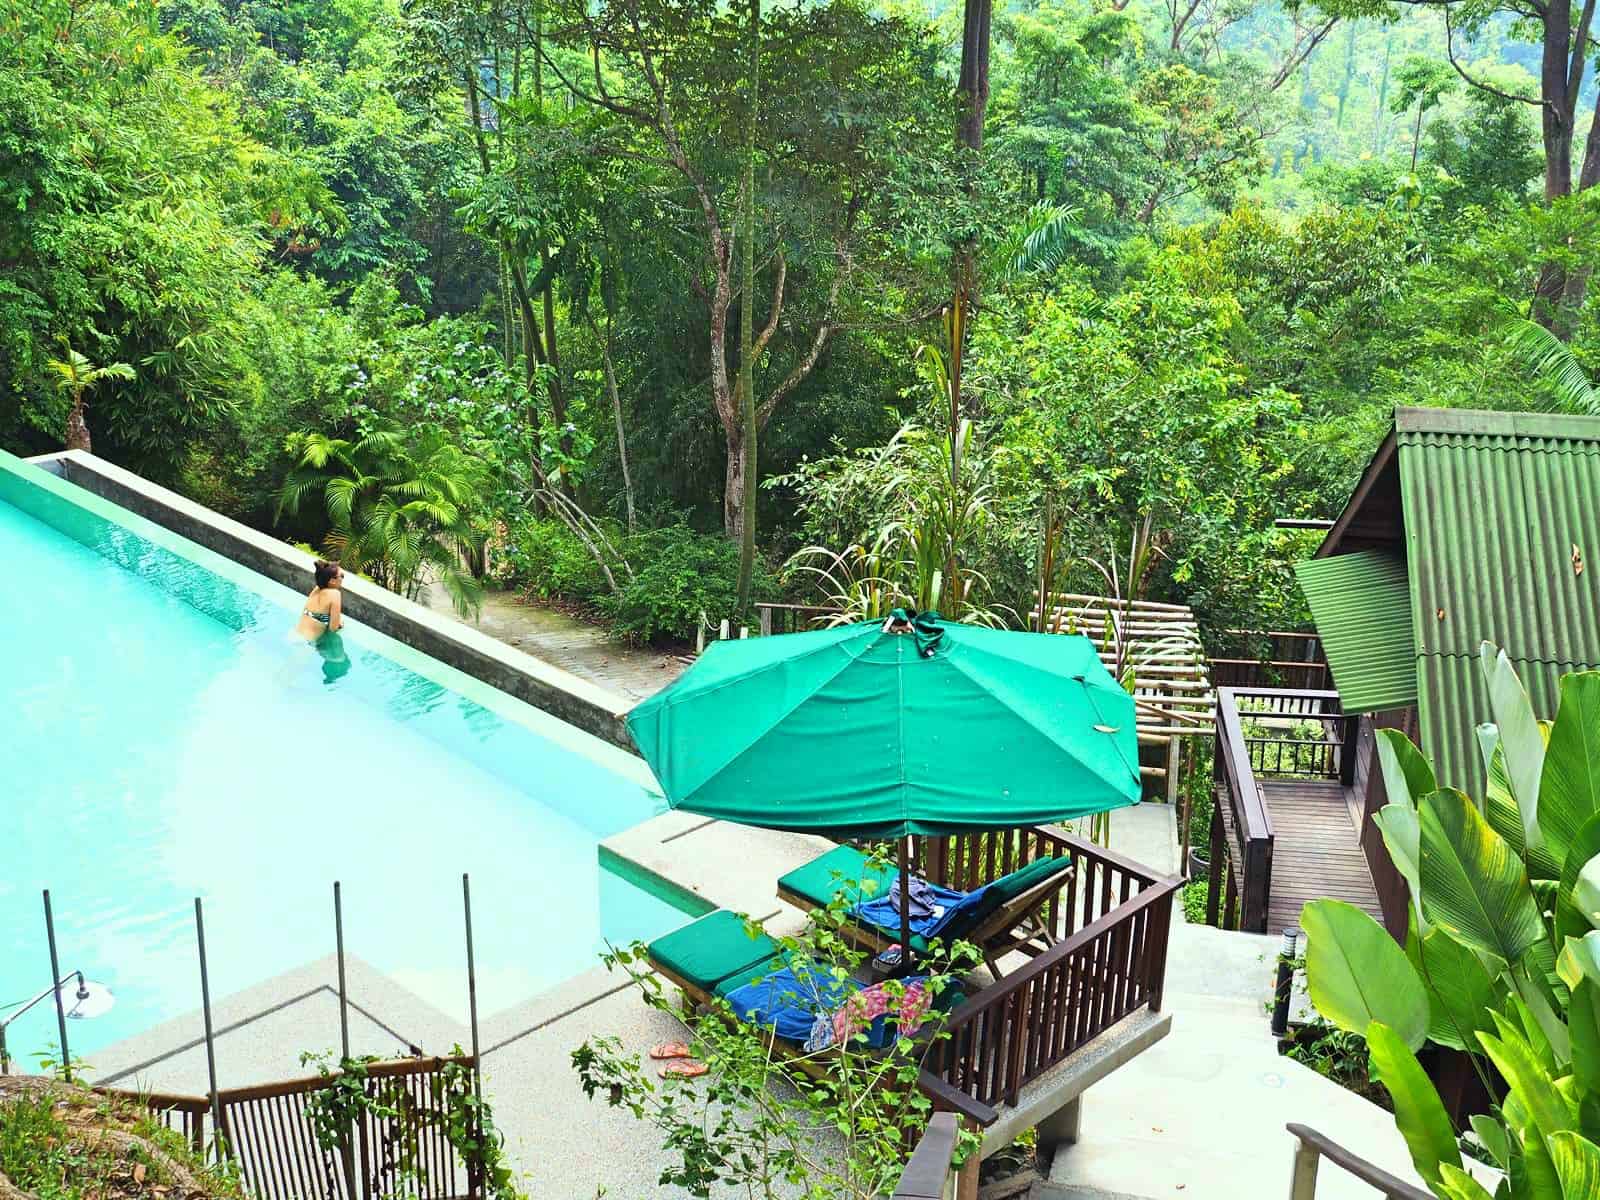 Chilling in the pool at The Dusun resort in Malaysia // travelmermaid.com 